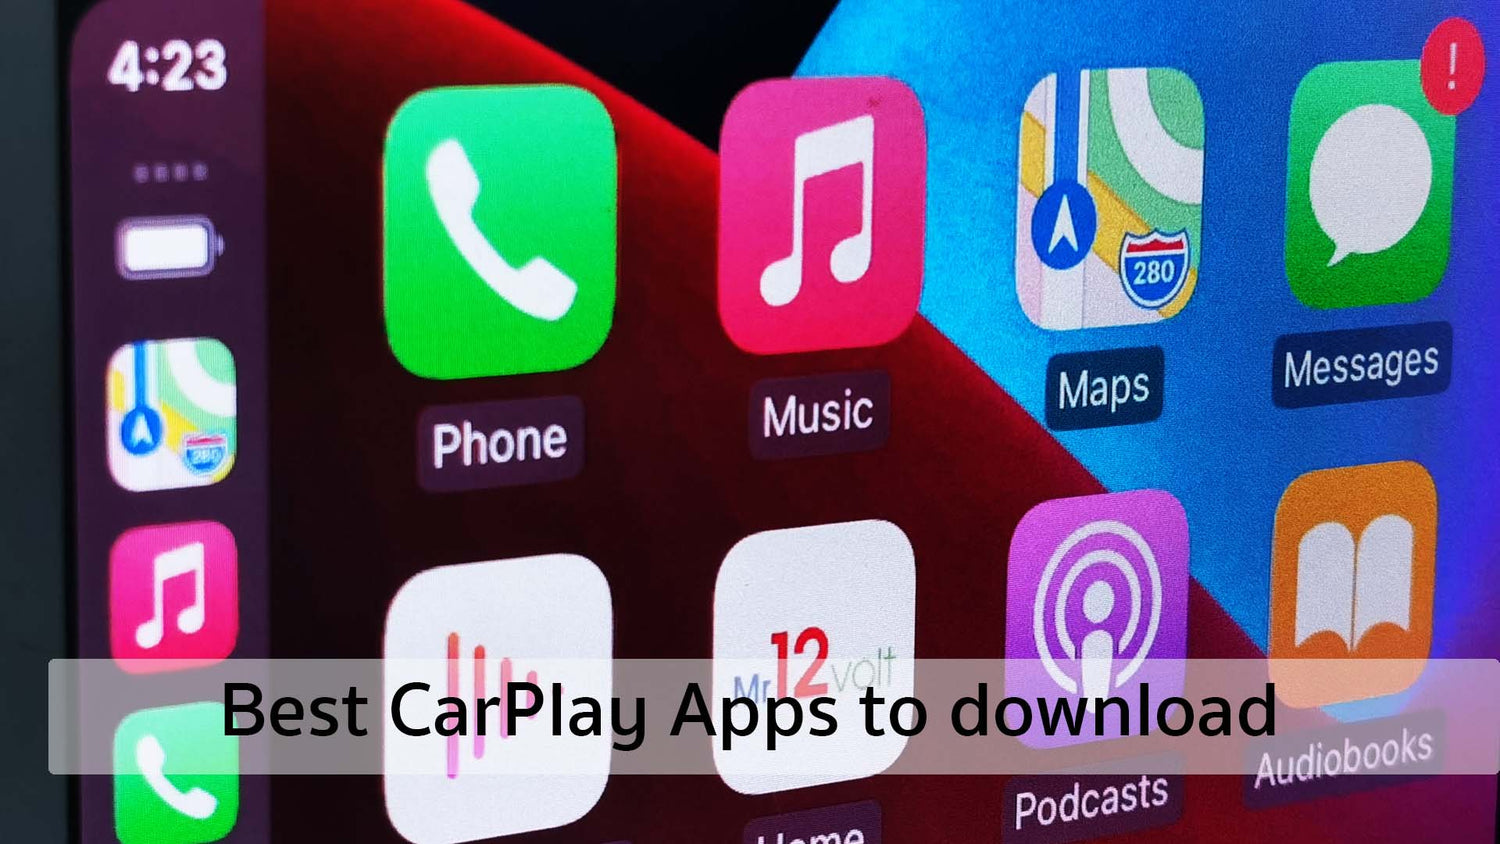 Best CarPlay apps to download on iPhone